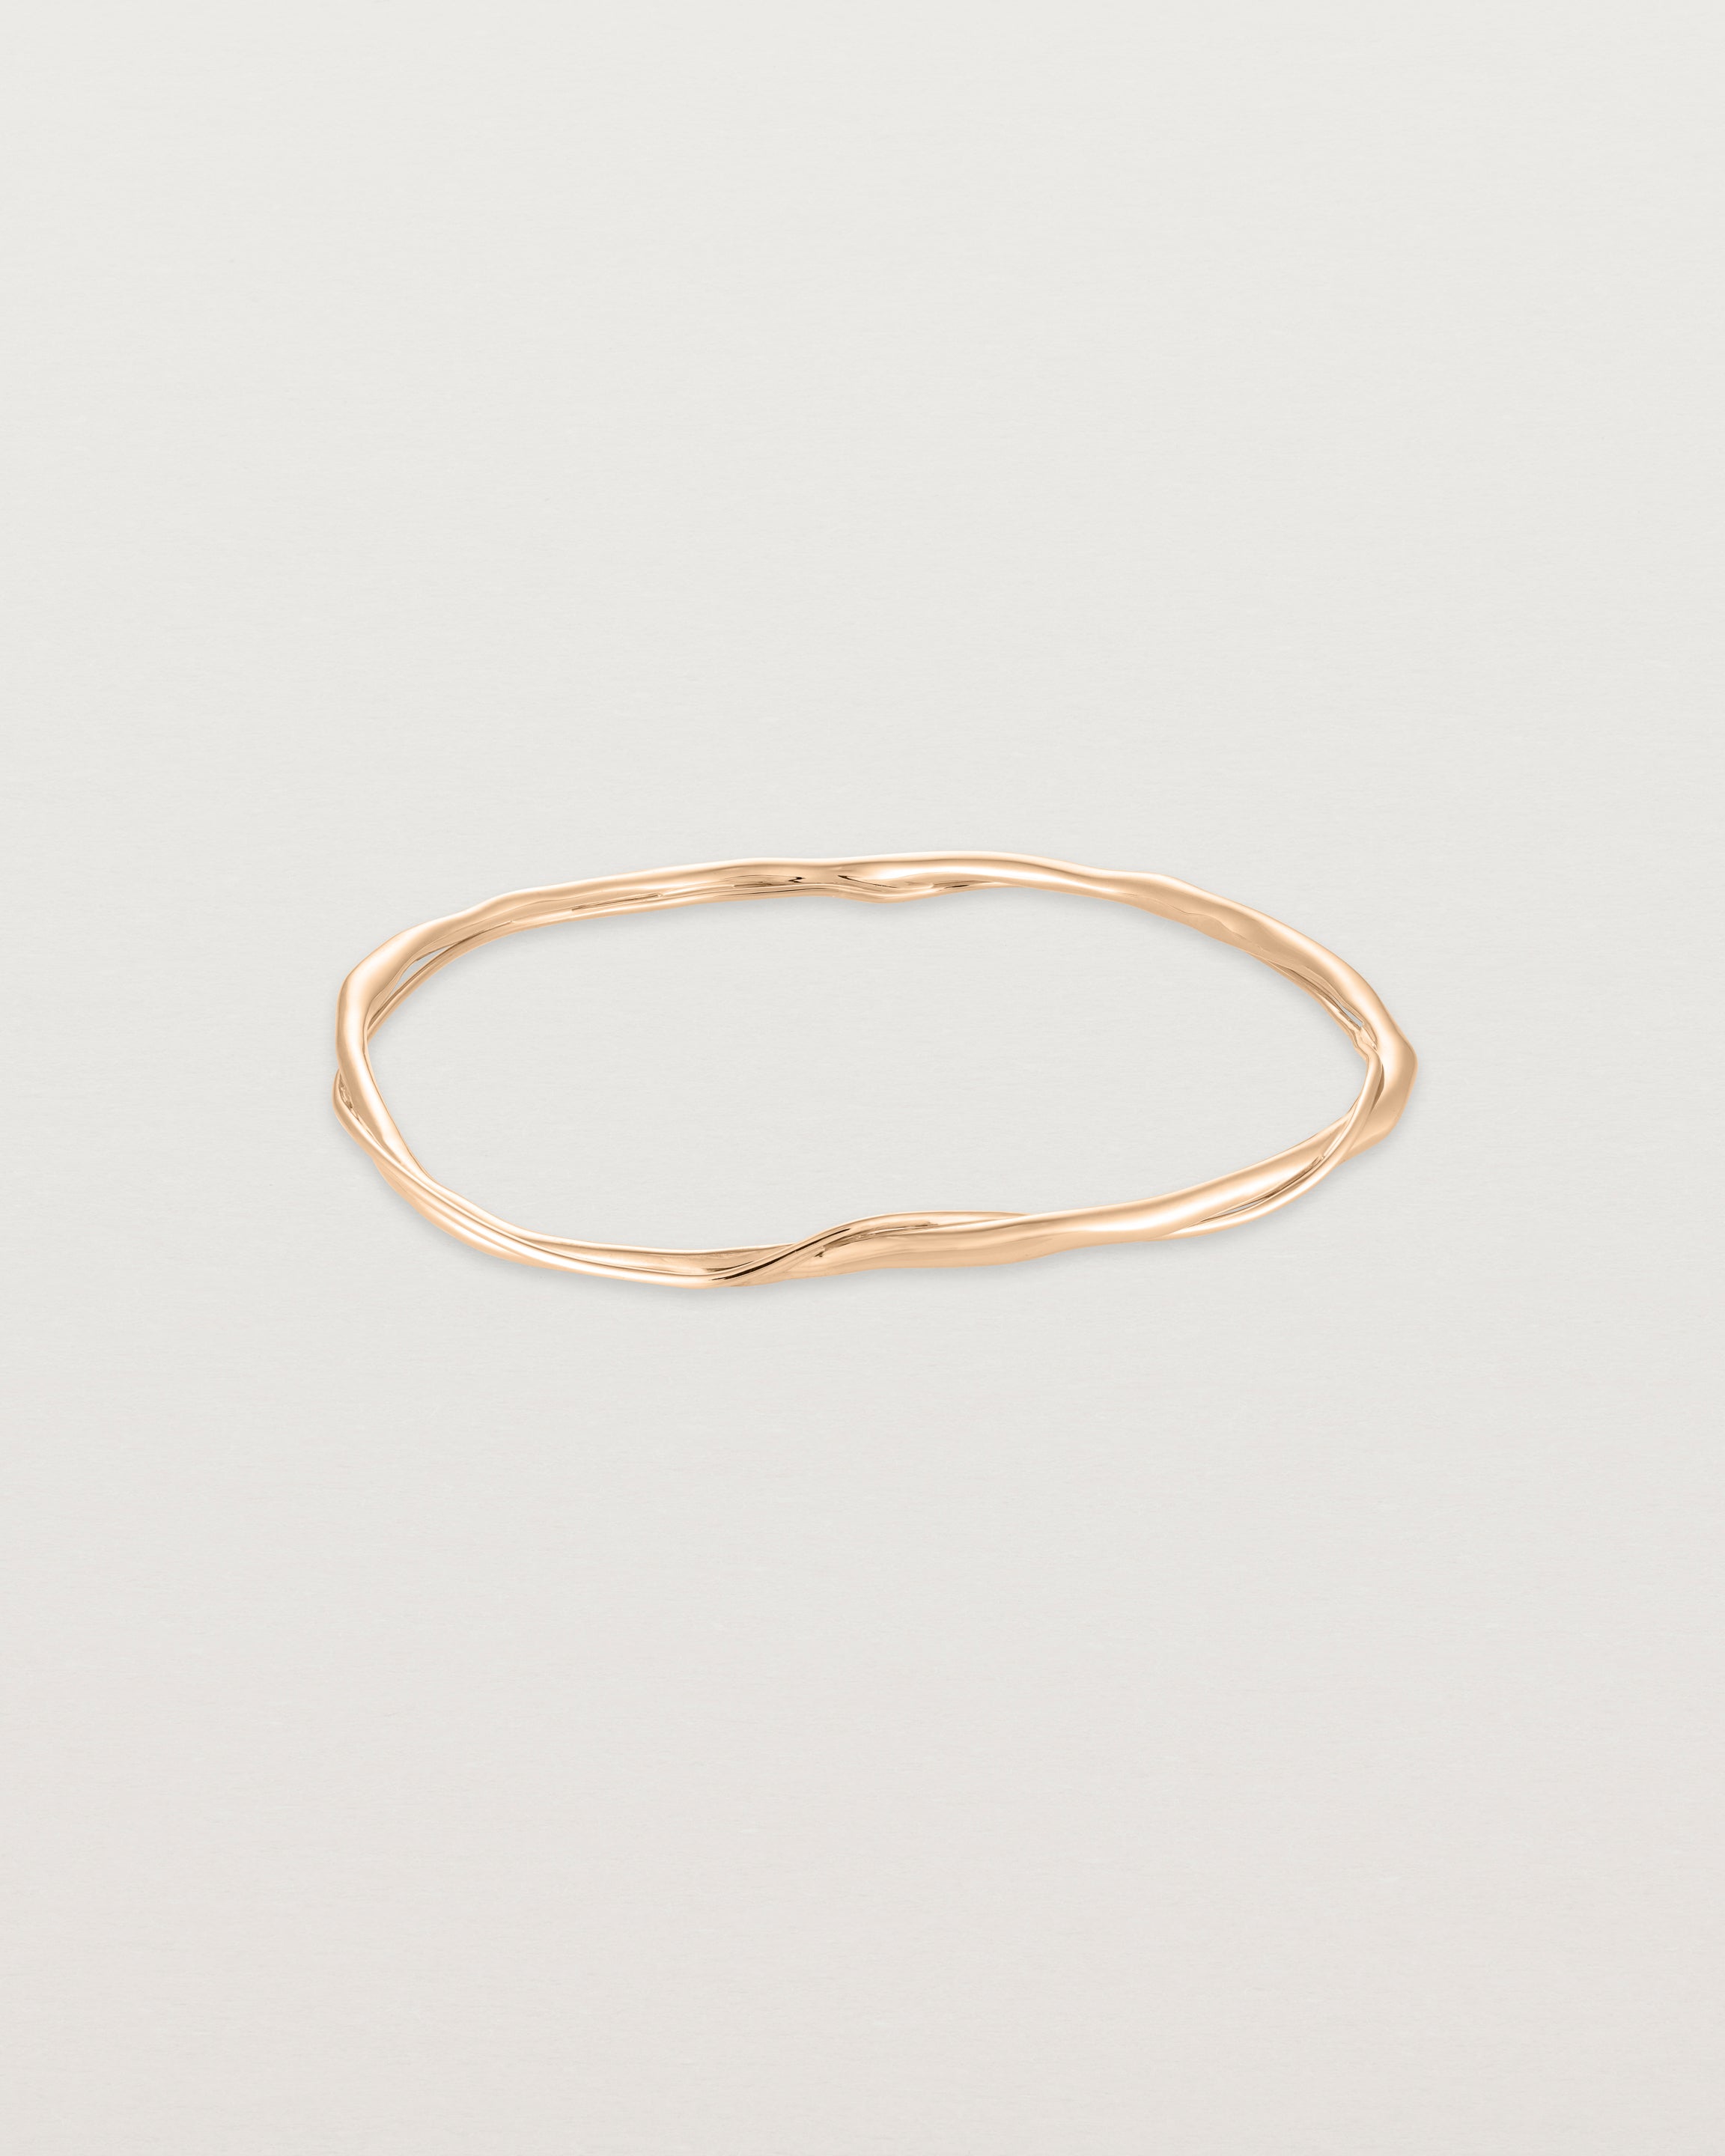 Front view of the Dalí Bangle in rose gold